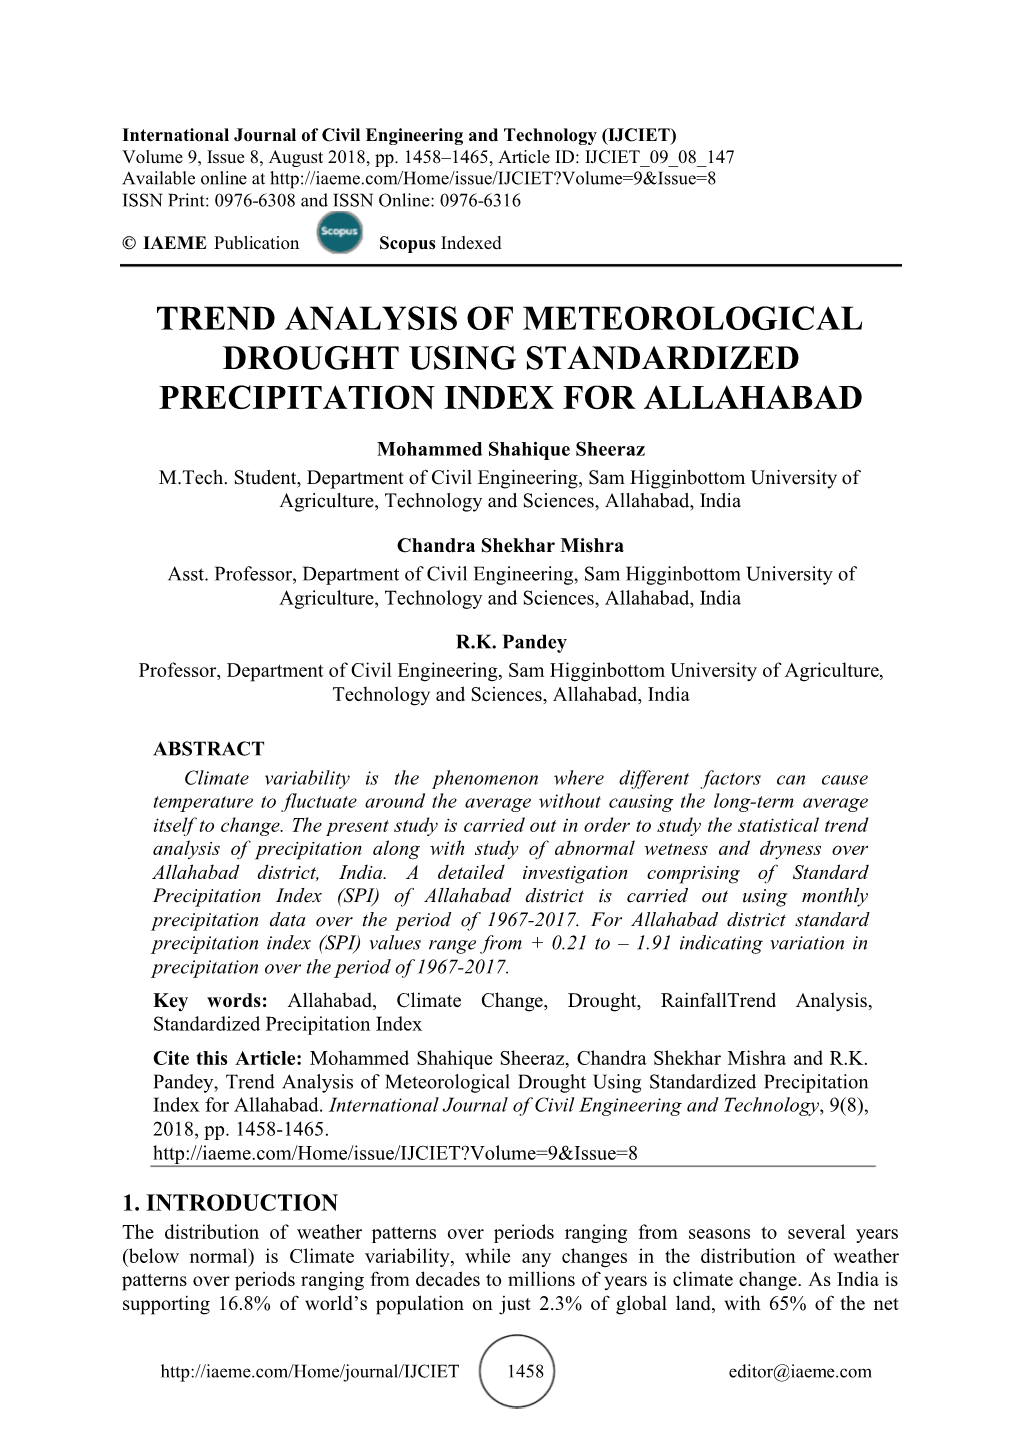 Trend Analysis of Meteorological Drought Using Standardized Precipitation Index for Allahabad